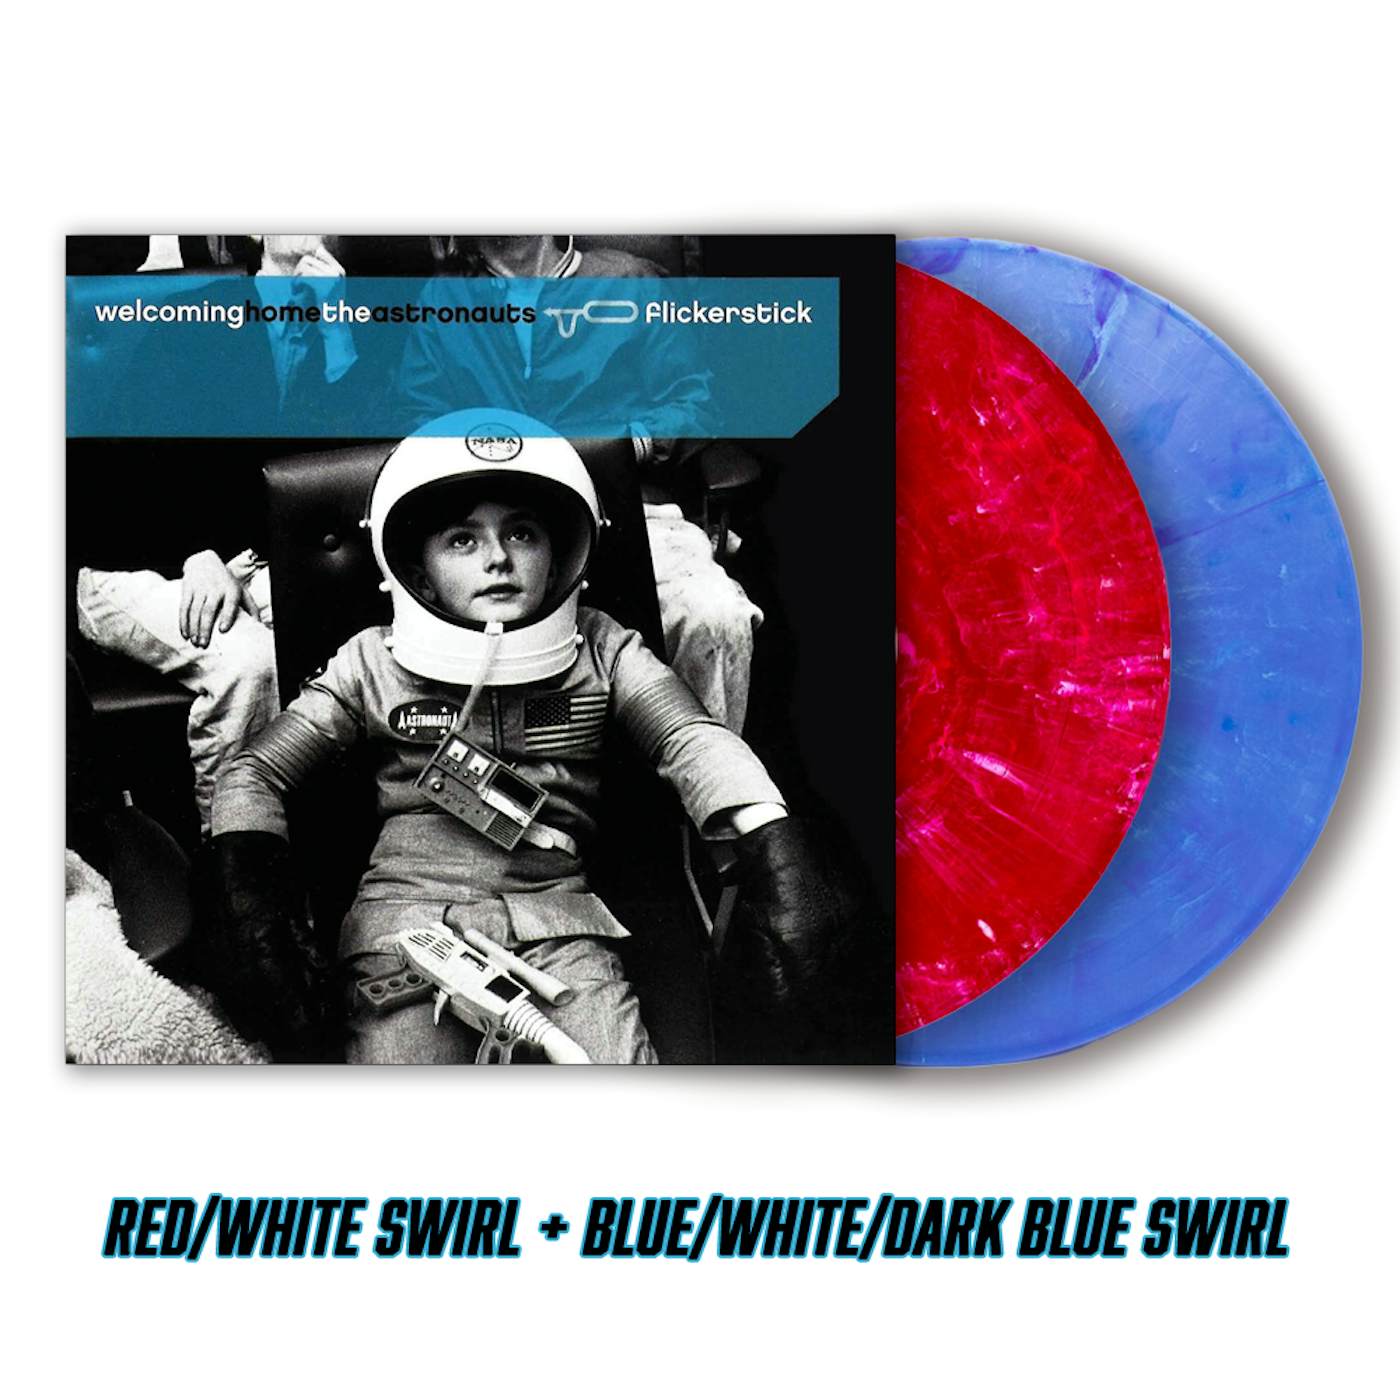 Flickerstick - Welcoming Home The Astronauts Red Swirl/Blue Swirl LP Limited Edition (Vinyl)